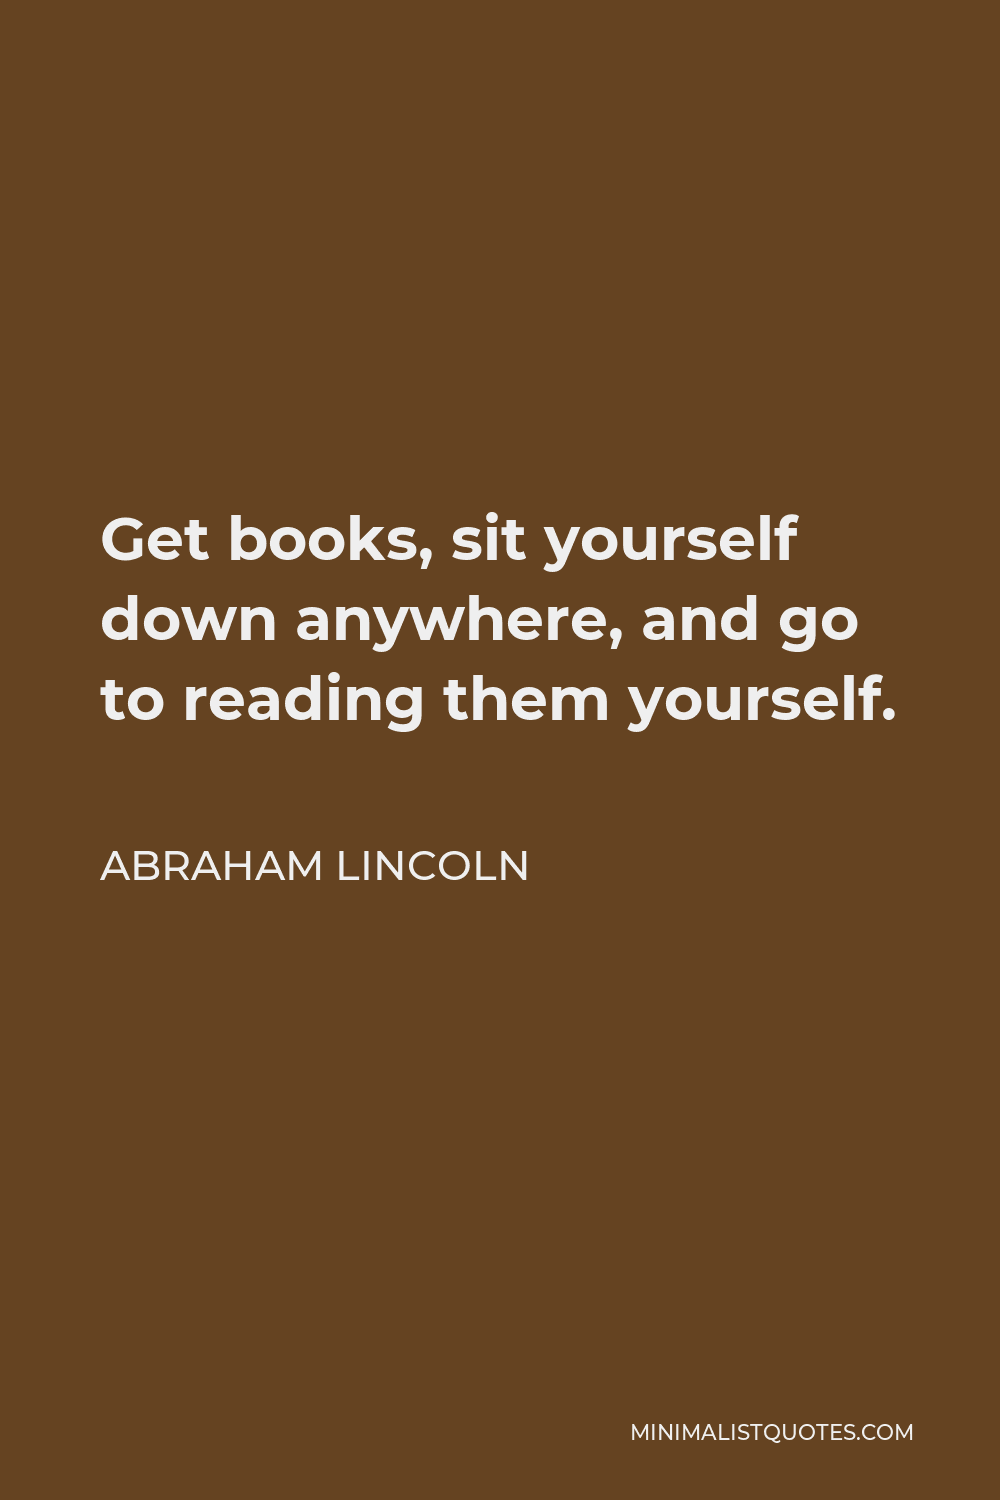 Abraham Lincoln Quote - Get books, sit yourself down anywhere, and go to reading them yourself.